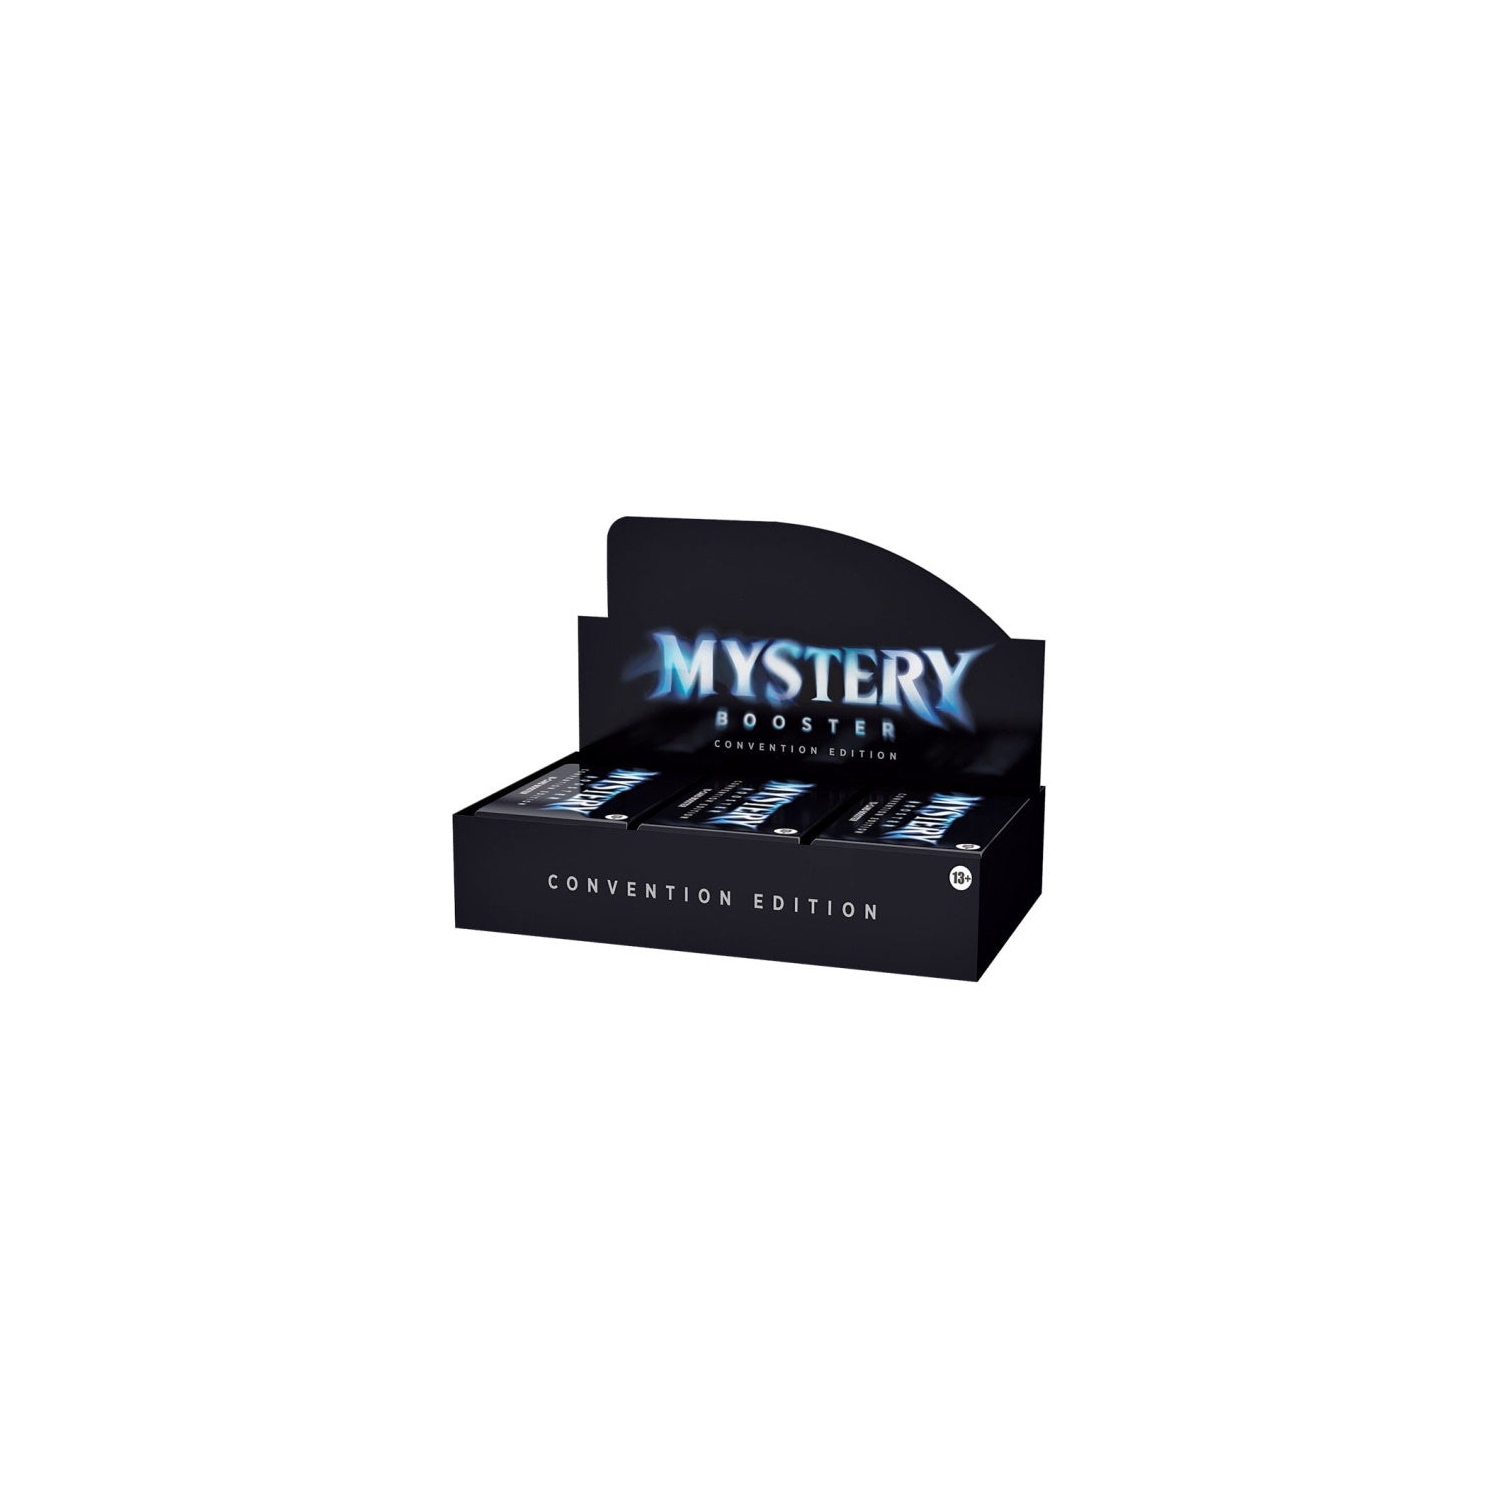 Magic: The Gathering Draft Booster Box - Mystery Booster (2021 Convention Edition)